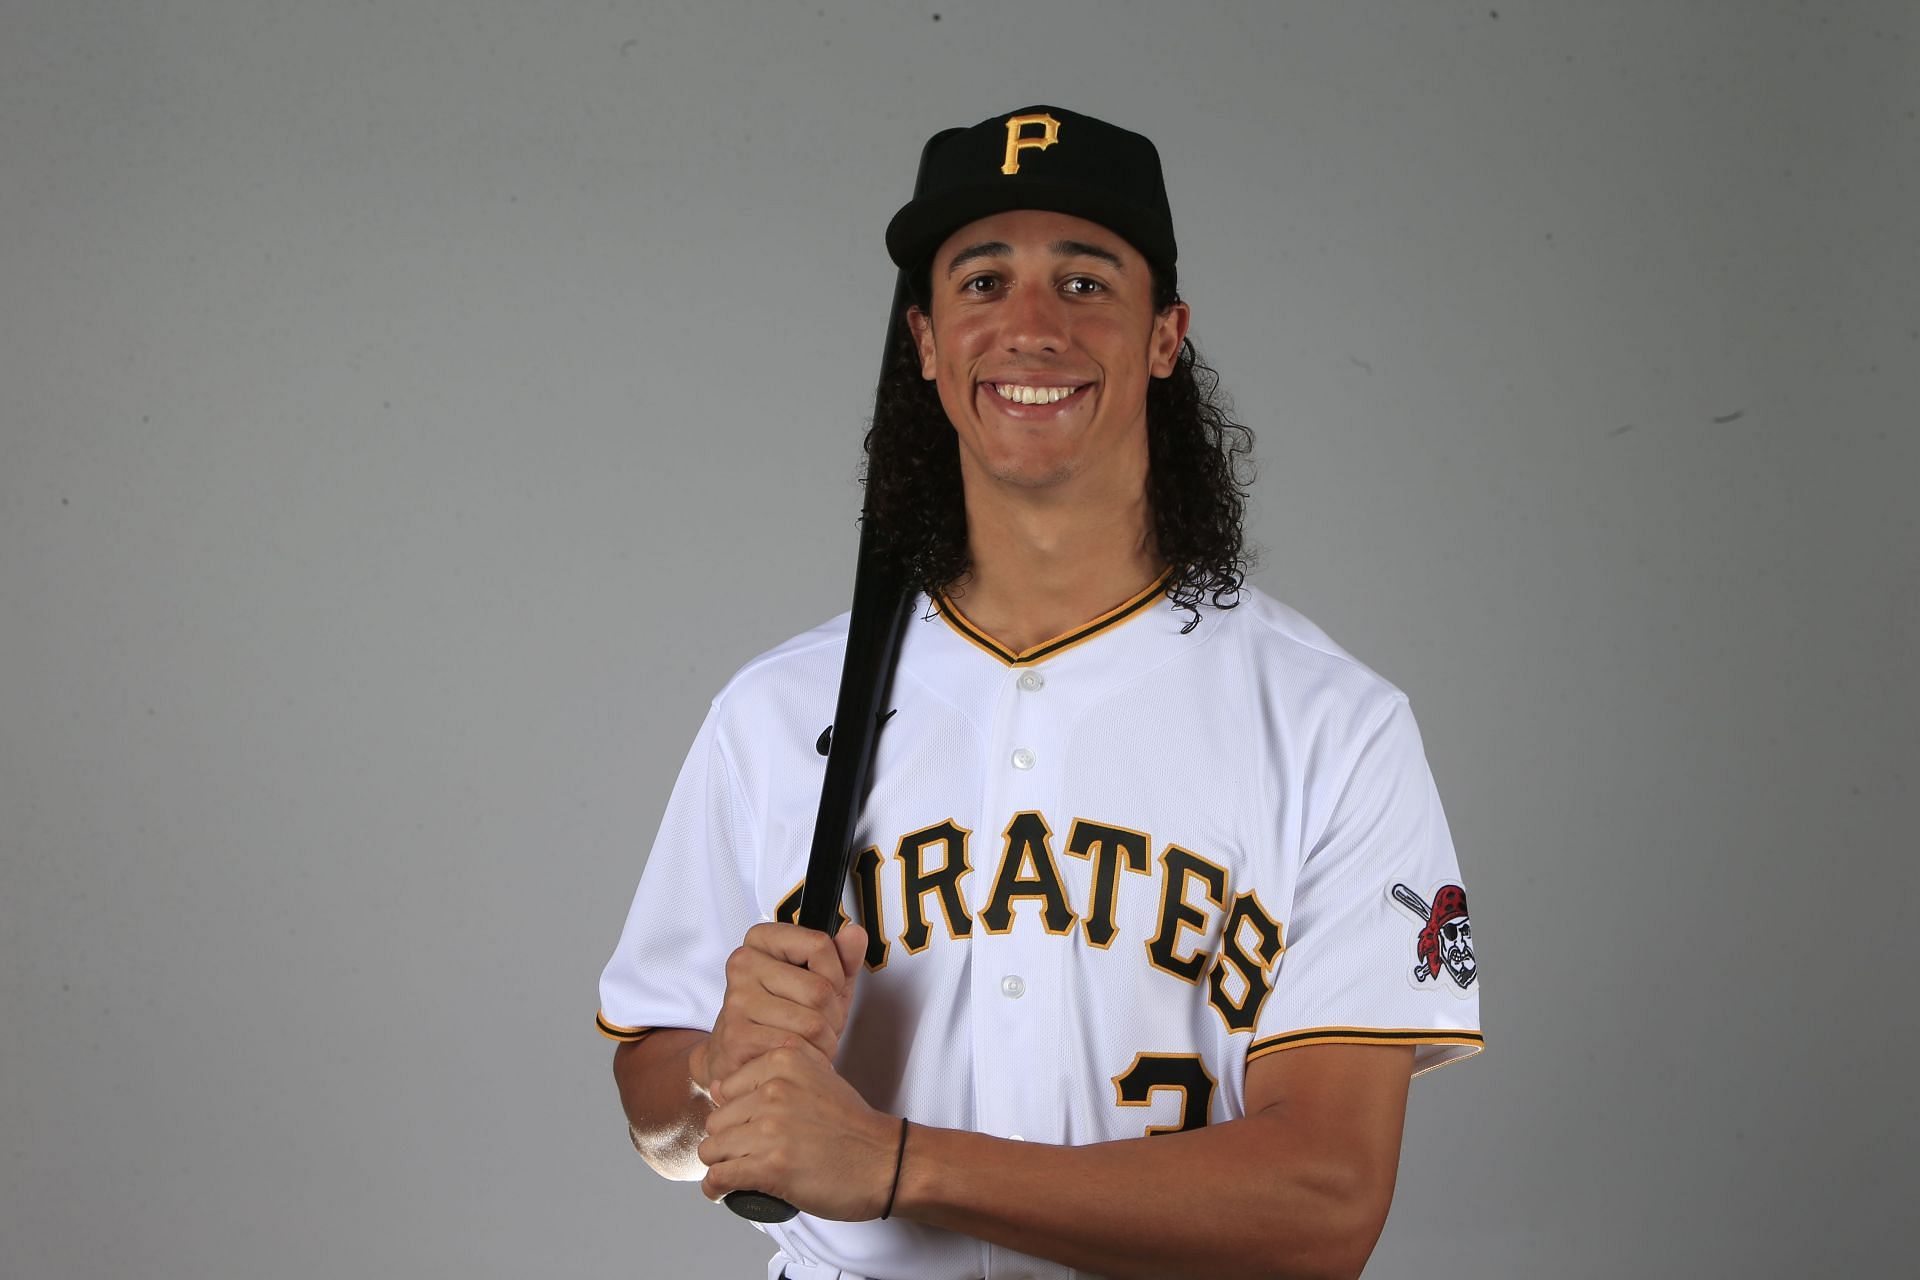 Pittsburgh Pirates Photo Day: BRADENTON, FL - FEBRUARY 19: Cole Tucker #3 of the Pittsburgh Pirates poses for a photo during the Pirates&#039; photo day on February 19, 2020 at Pirate City in Bradenton, Florida. (Photo by Brian Blanco/Getty Images)